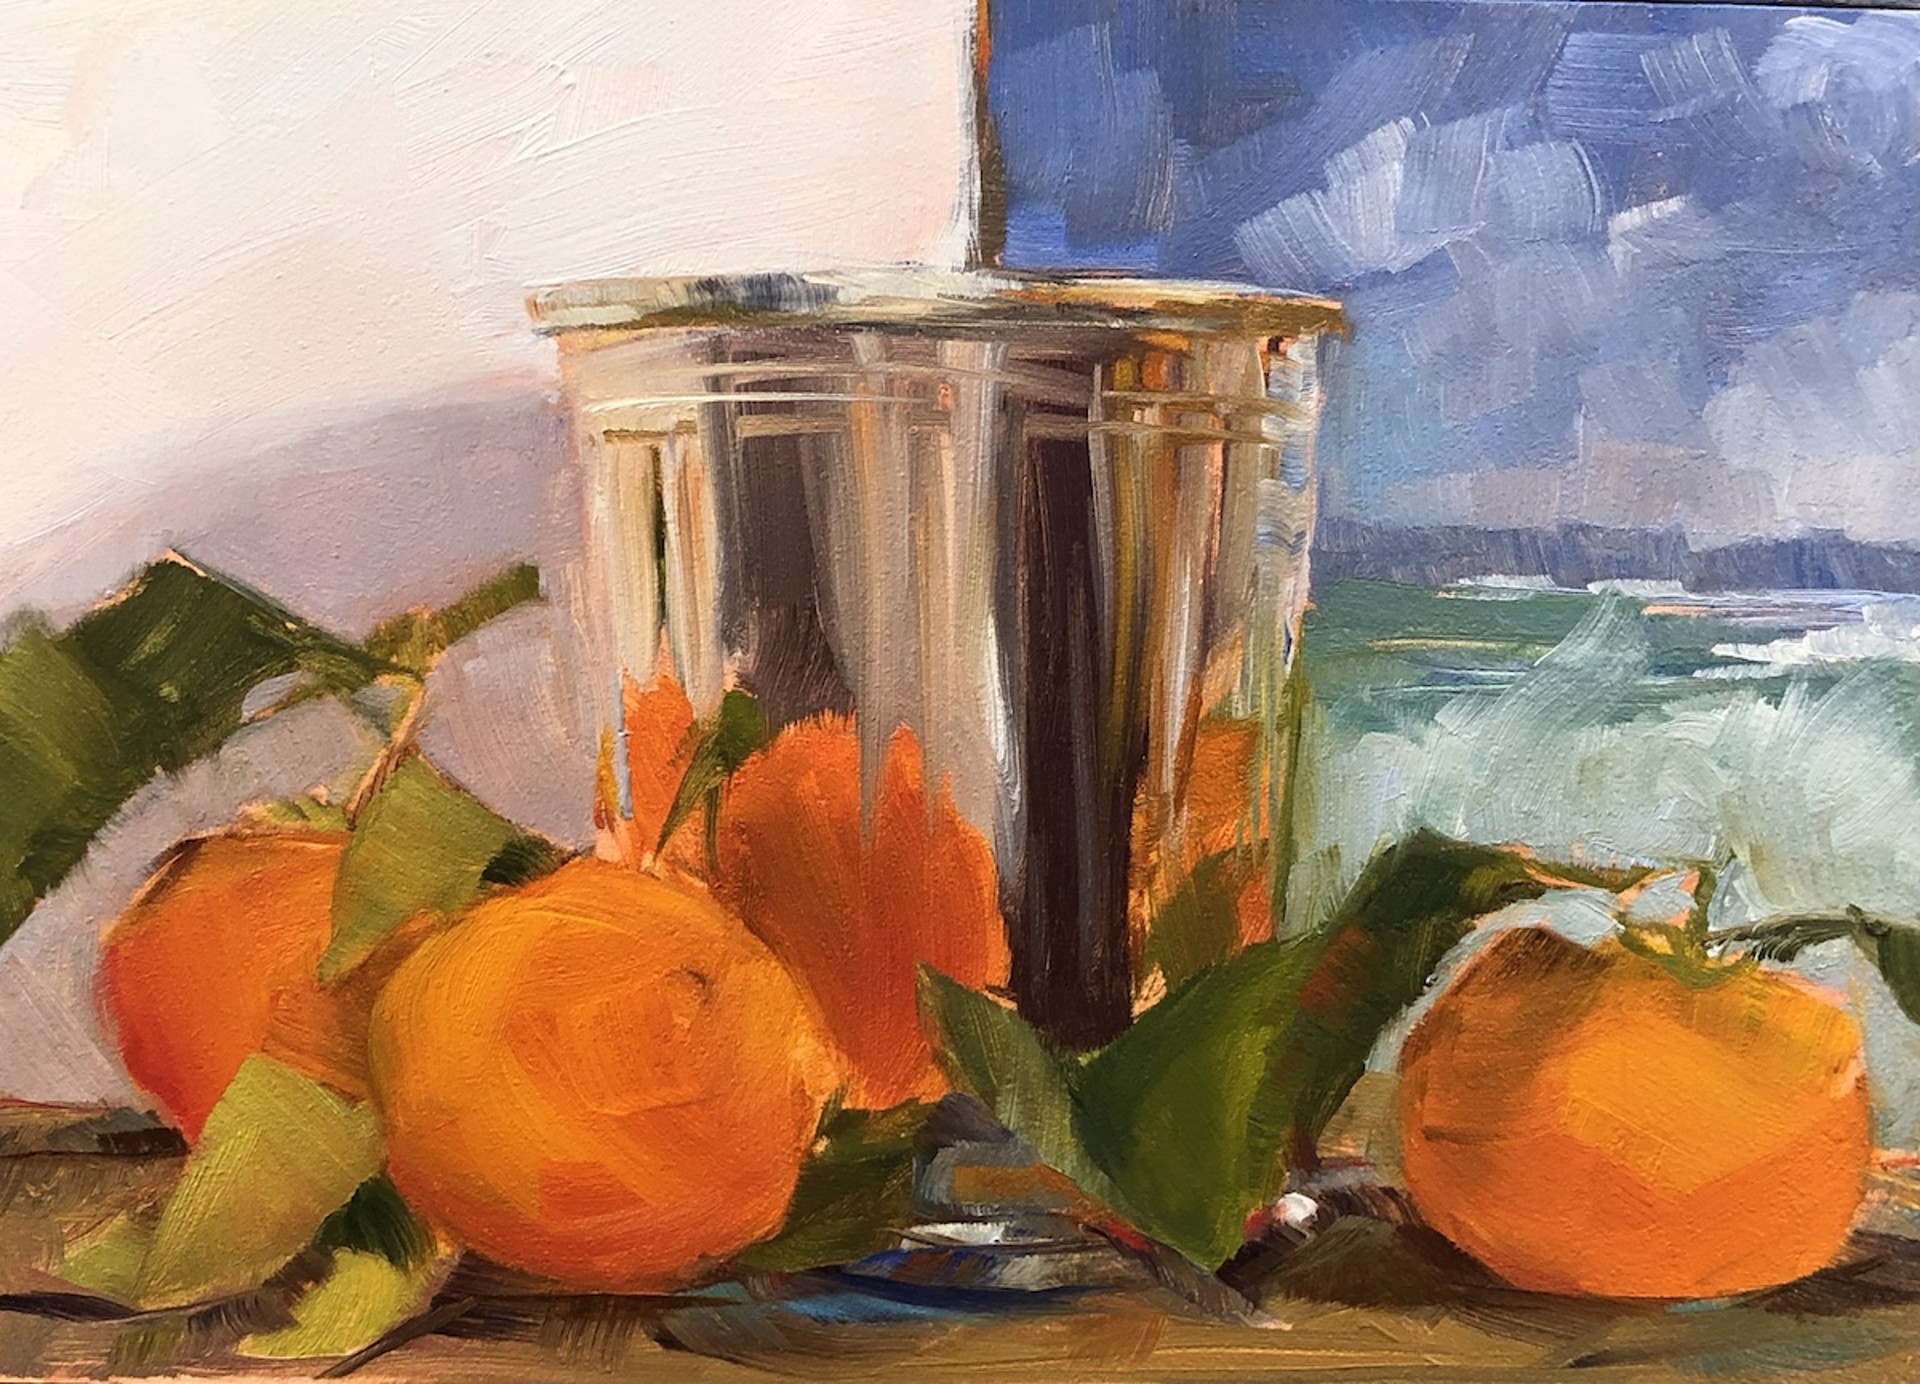 Reflections in a Silver Cup by Cornelia Emery